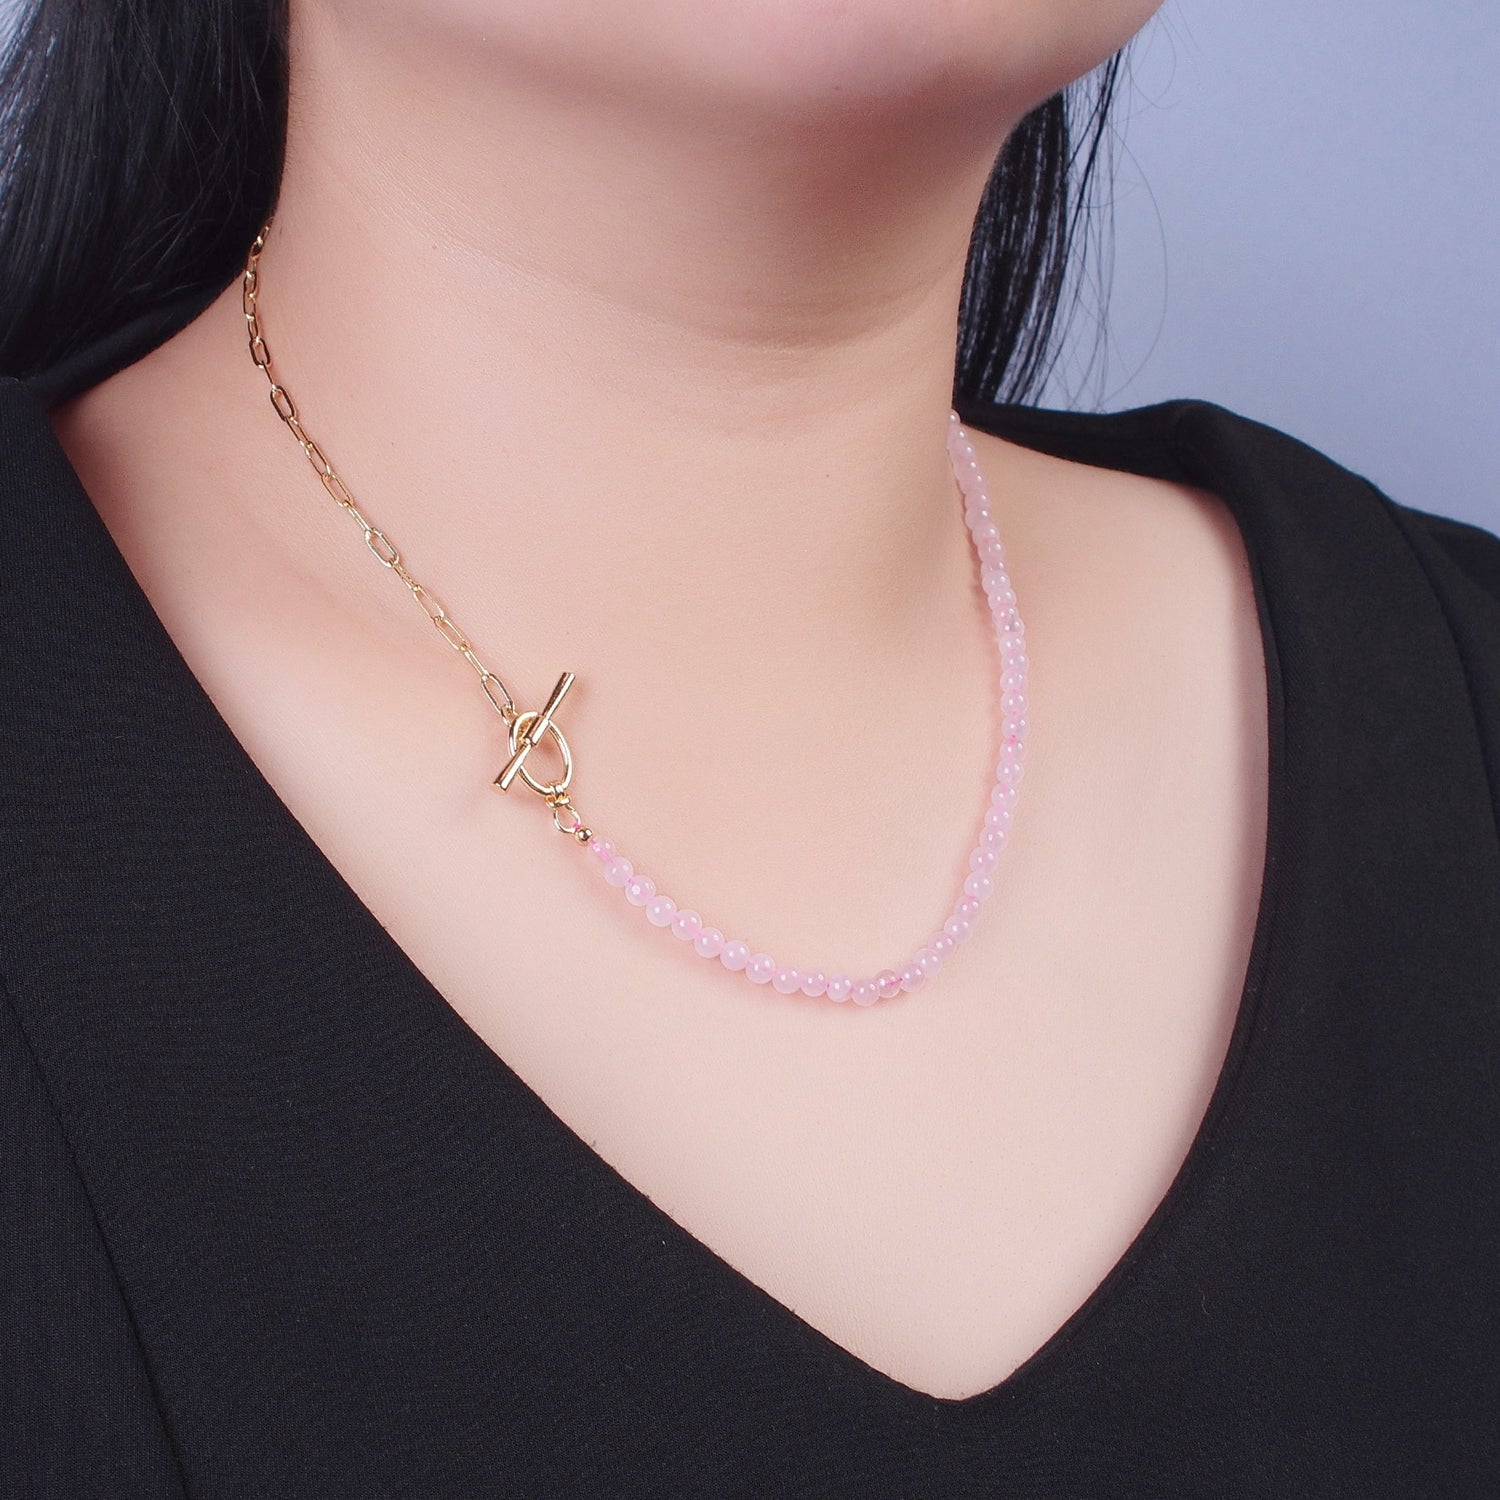 Dainty Half Bead Half Link Chain Necklace, 24k Gold Filled Paperclip Chain with Pink Quartz Necklace with Oval Toggle Clasps WA-1019 - DLUXCA